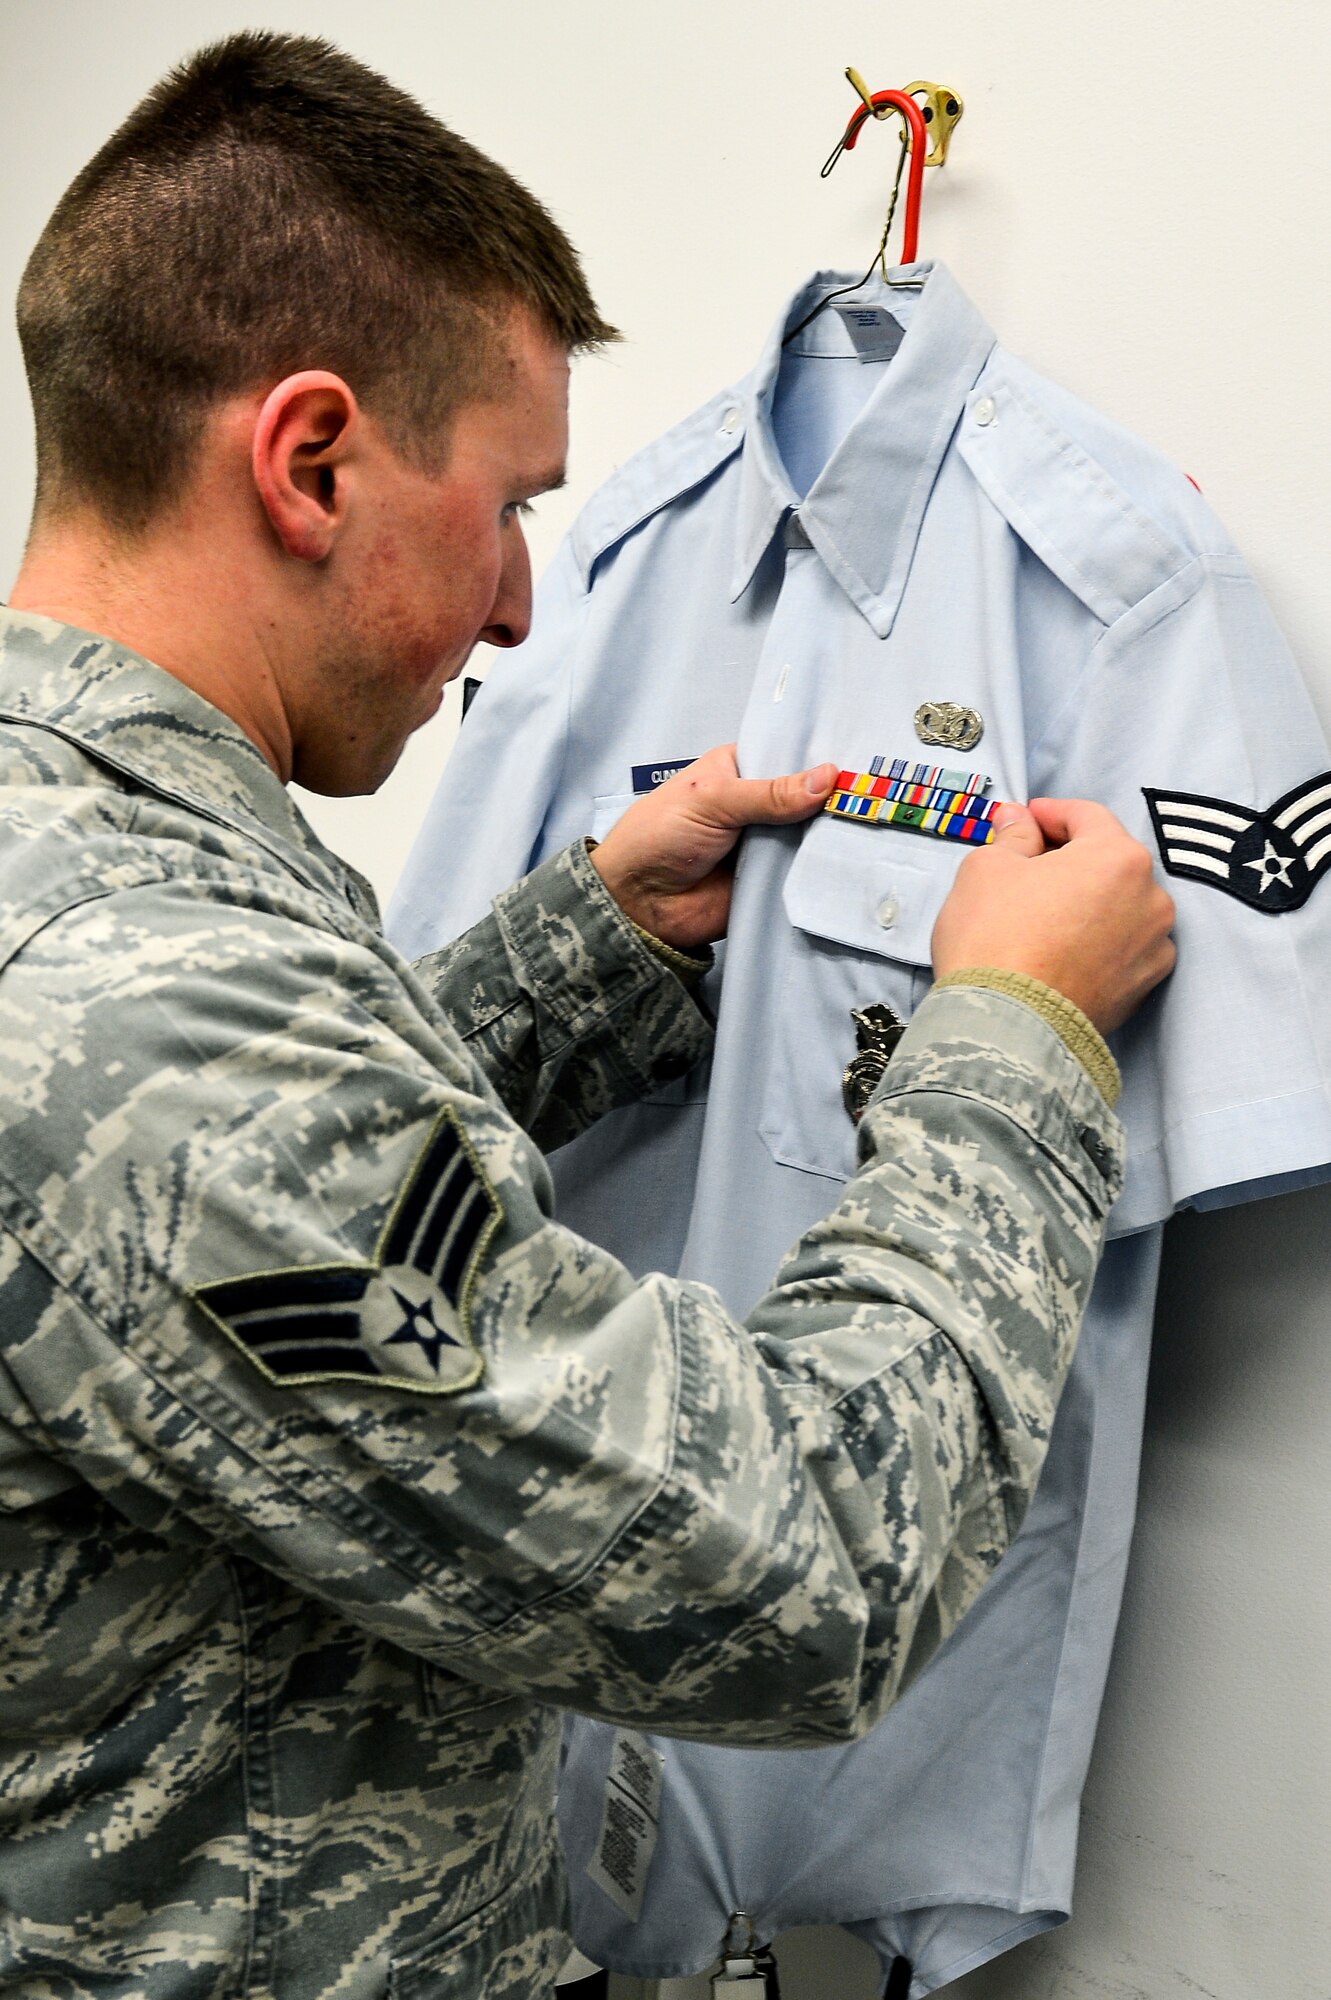 Senior Airman Joshua Cunningham, 460th Mission Support Group Airman category annual award nominee, prepares his uniform before taking an official photograph as part of his annual award package Feb. 3, 2014, at the 460th Space Wing Public Affairs Office on Buckley Air Force Base, Colo. The photograph was one requirement for the annual awards competition, which also included meeting a board of four Buckley chief master sergeants. (U.S. Air Force photo by Senior Airman Riley Johnson/Released)